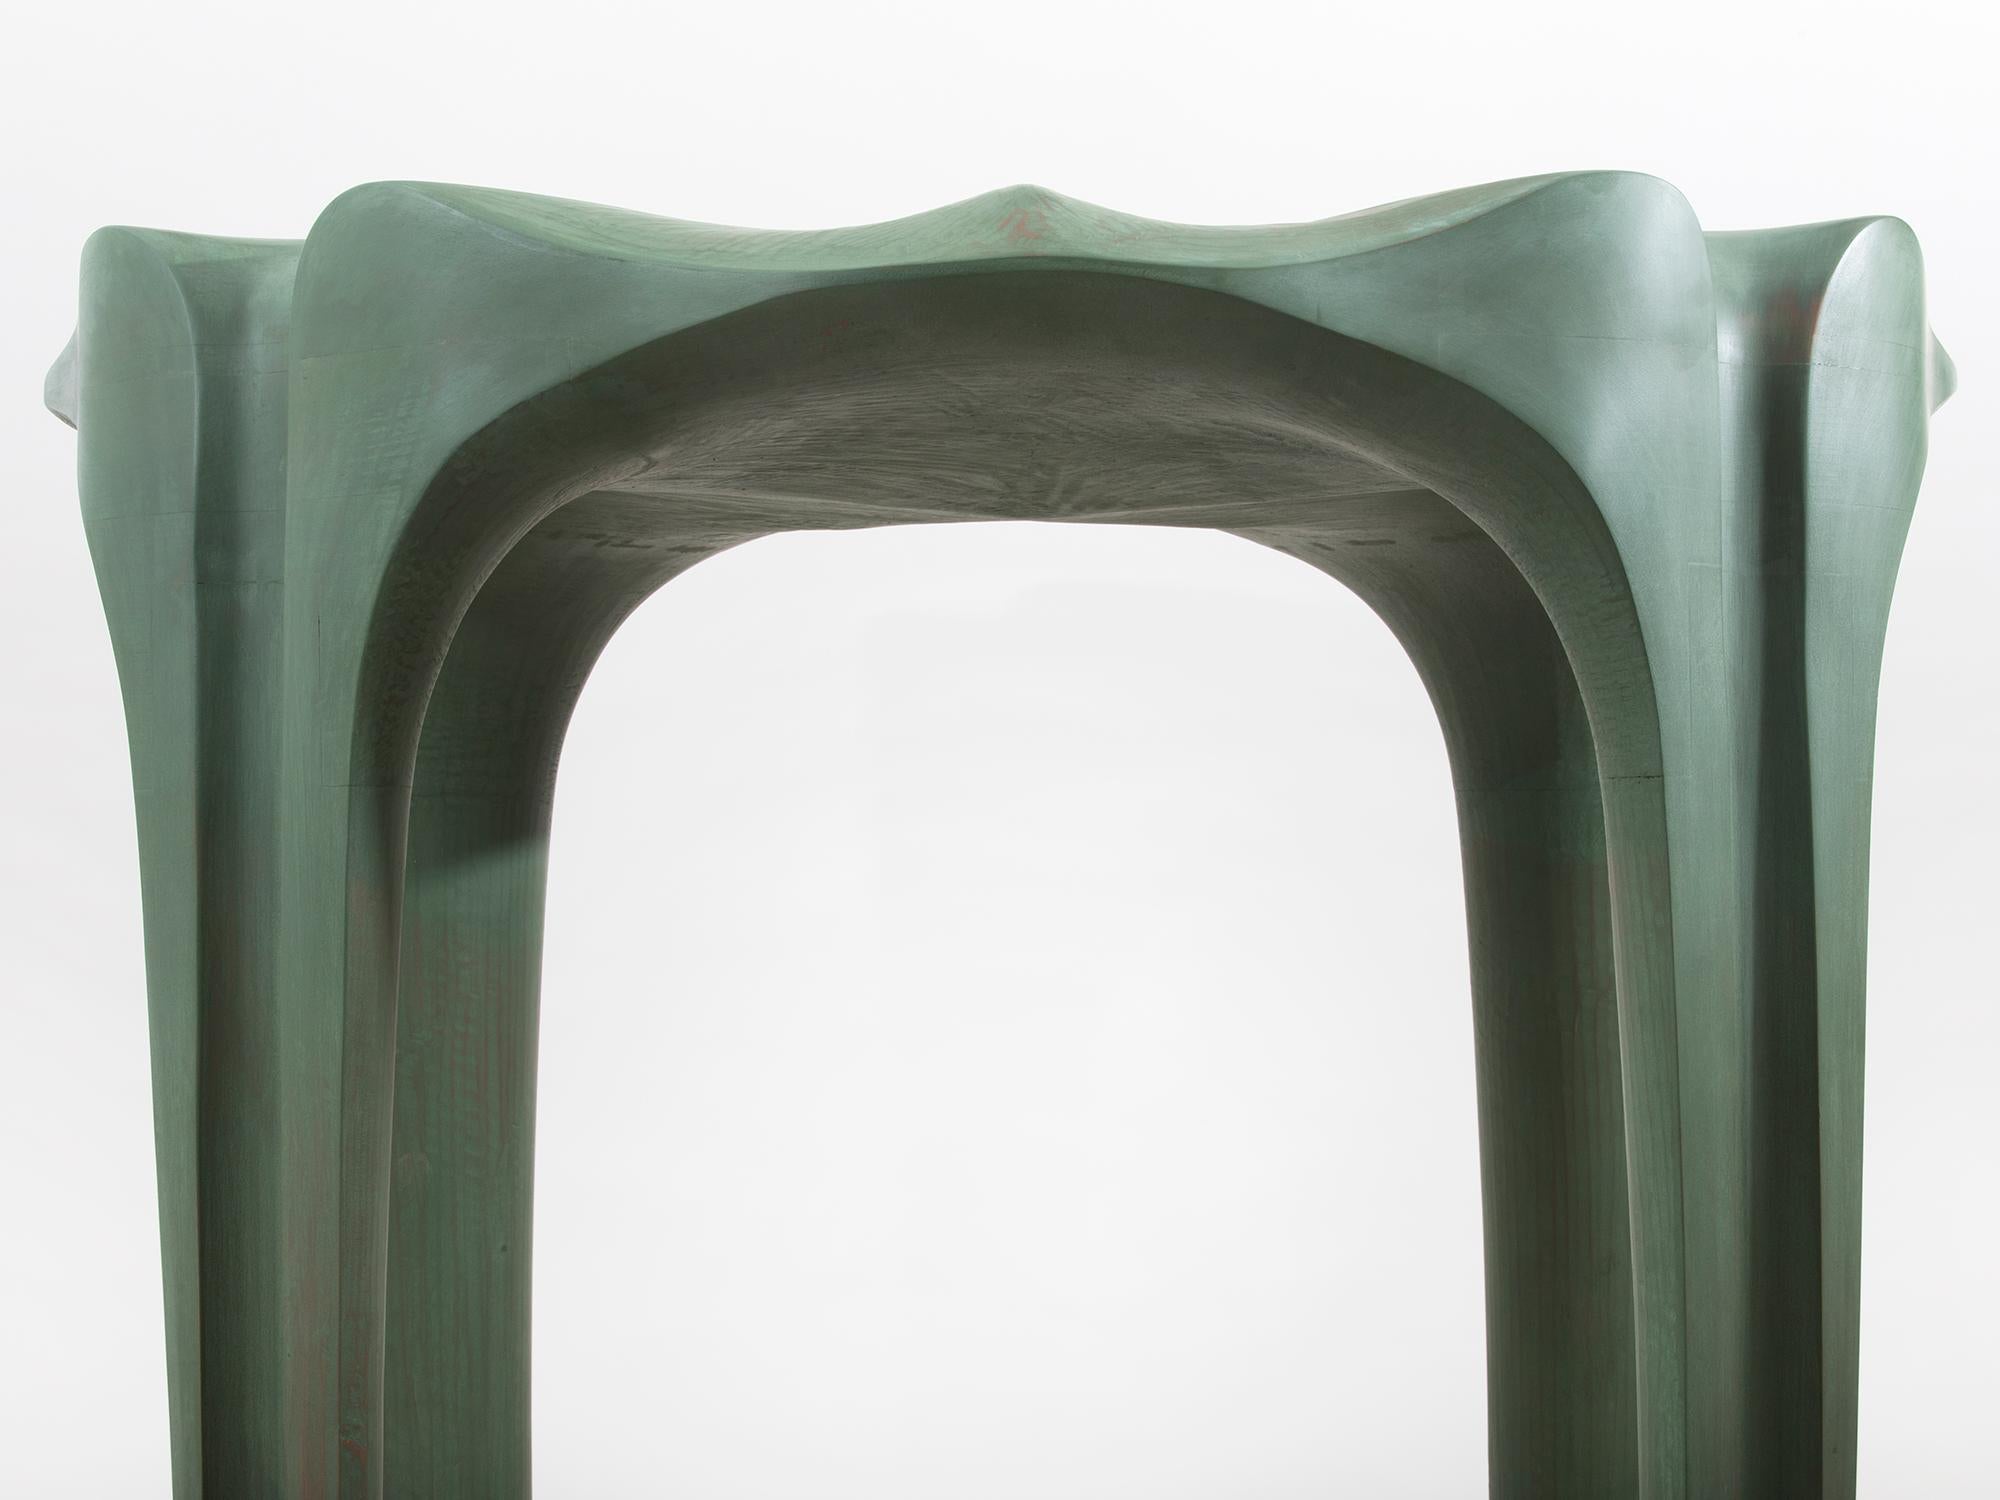 Large hand-carved and lathe-turned tulipwood sculpture with green milk paint finish, based on design details of Windsor furniture. Both anthropomorphic and architectural, it inverts the image of the chair and its intended use. Made by Hudson